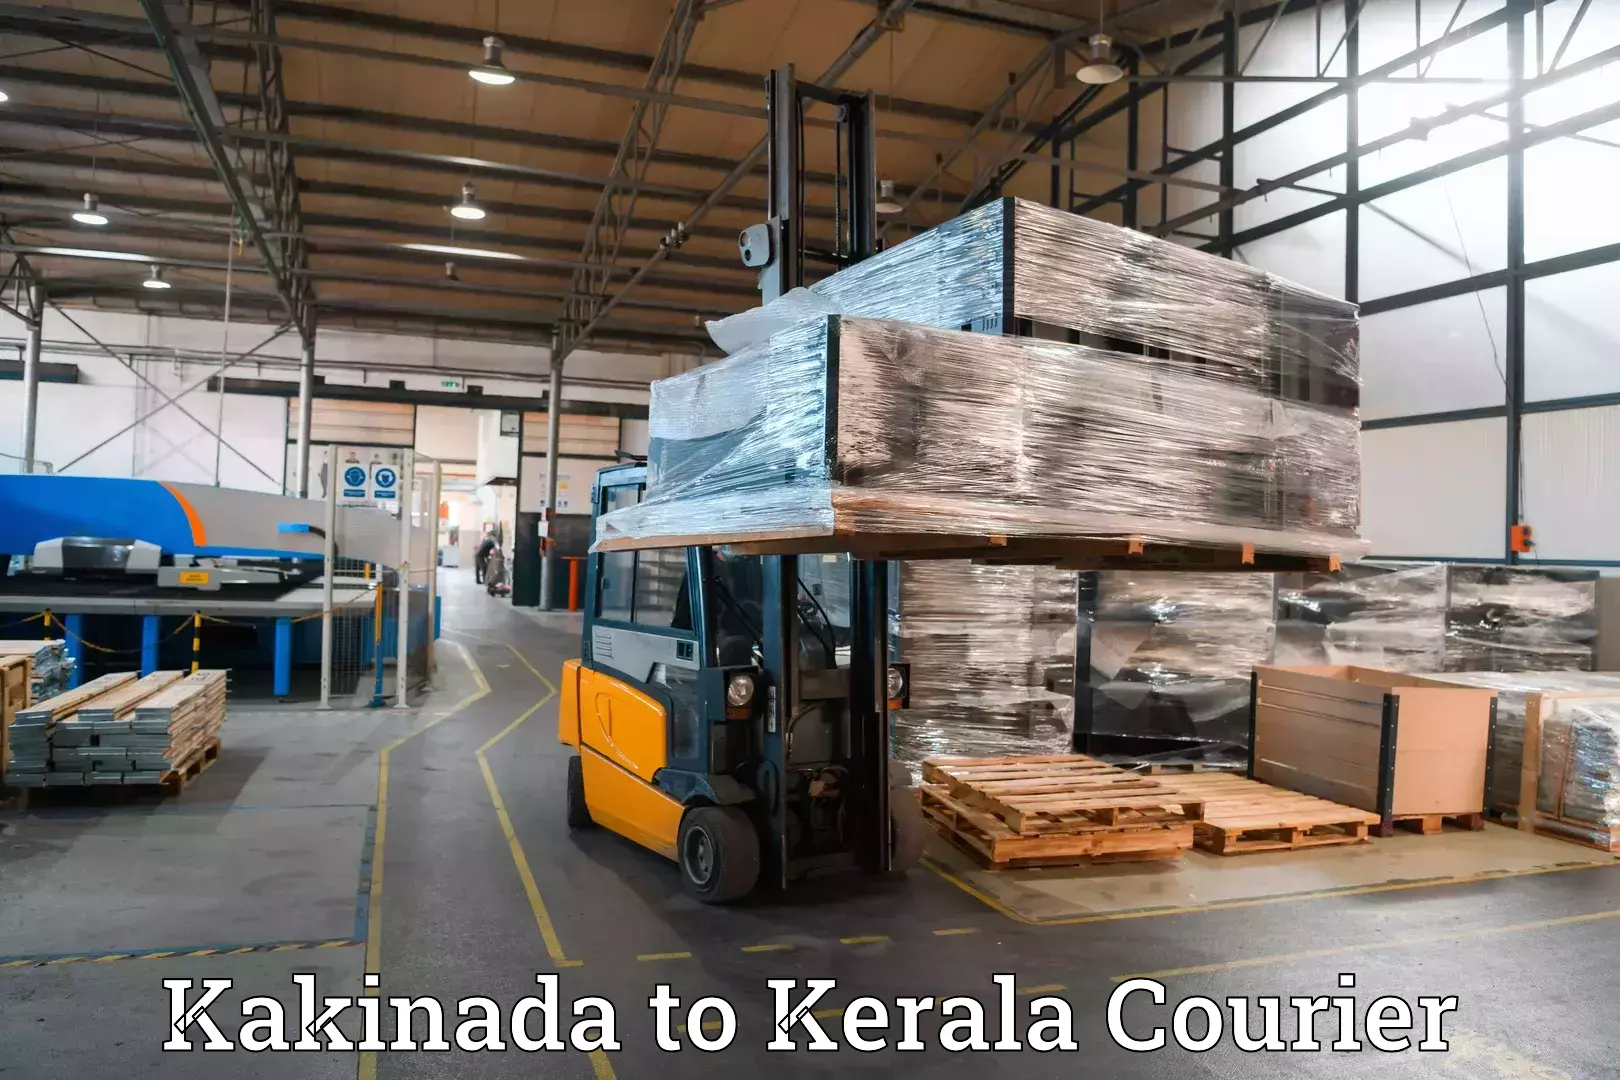 Baggage shipping experience Kakinada to Cochin University of Science and Technology